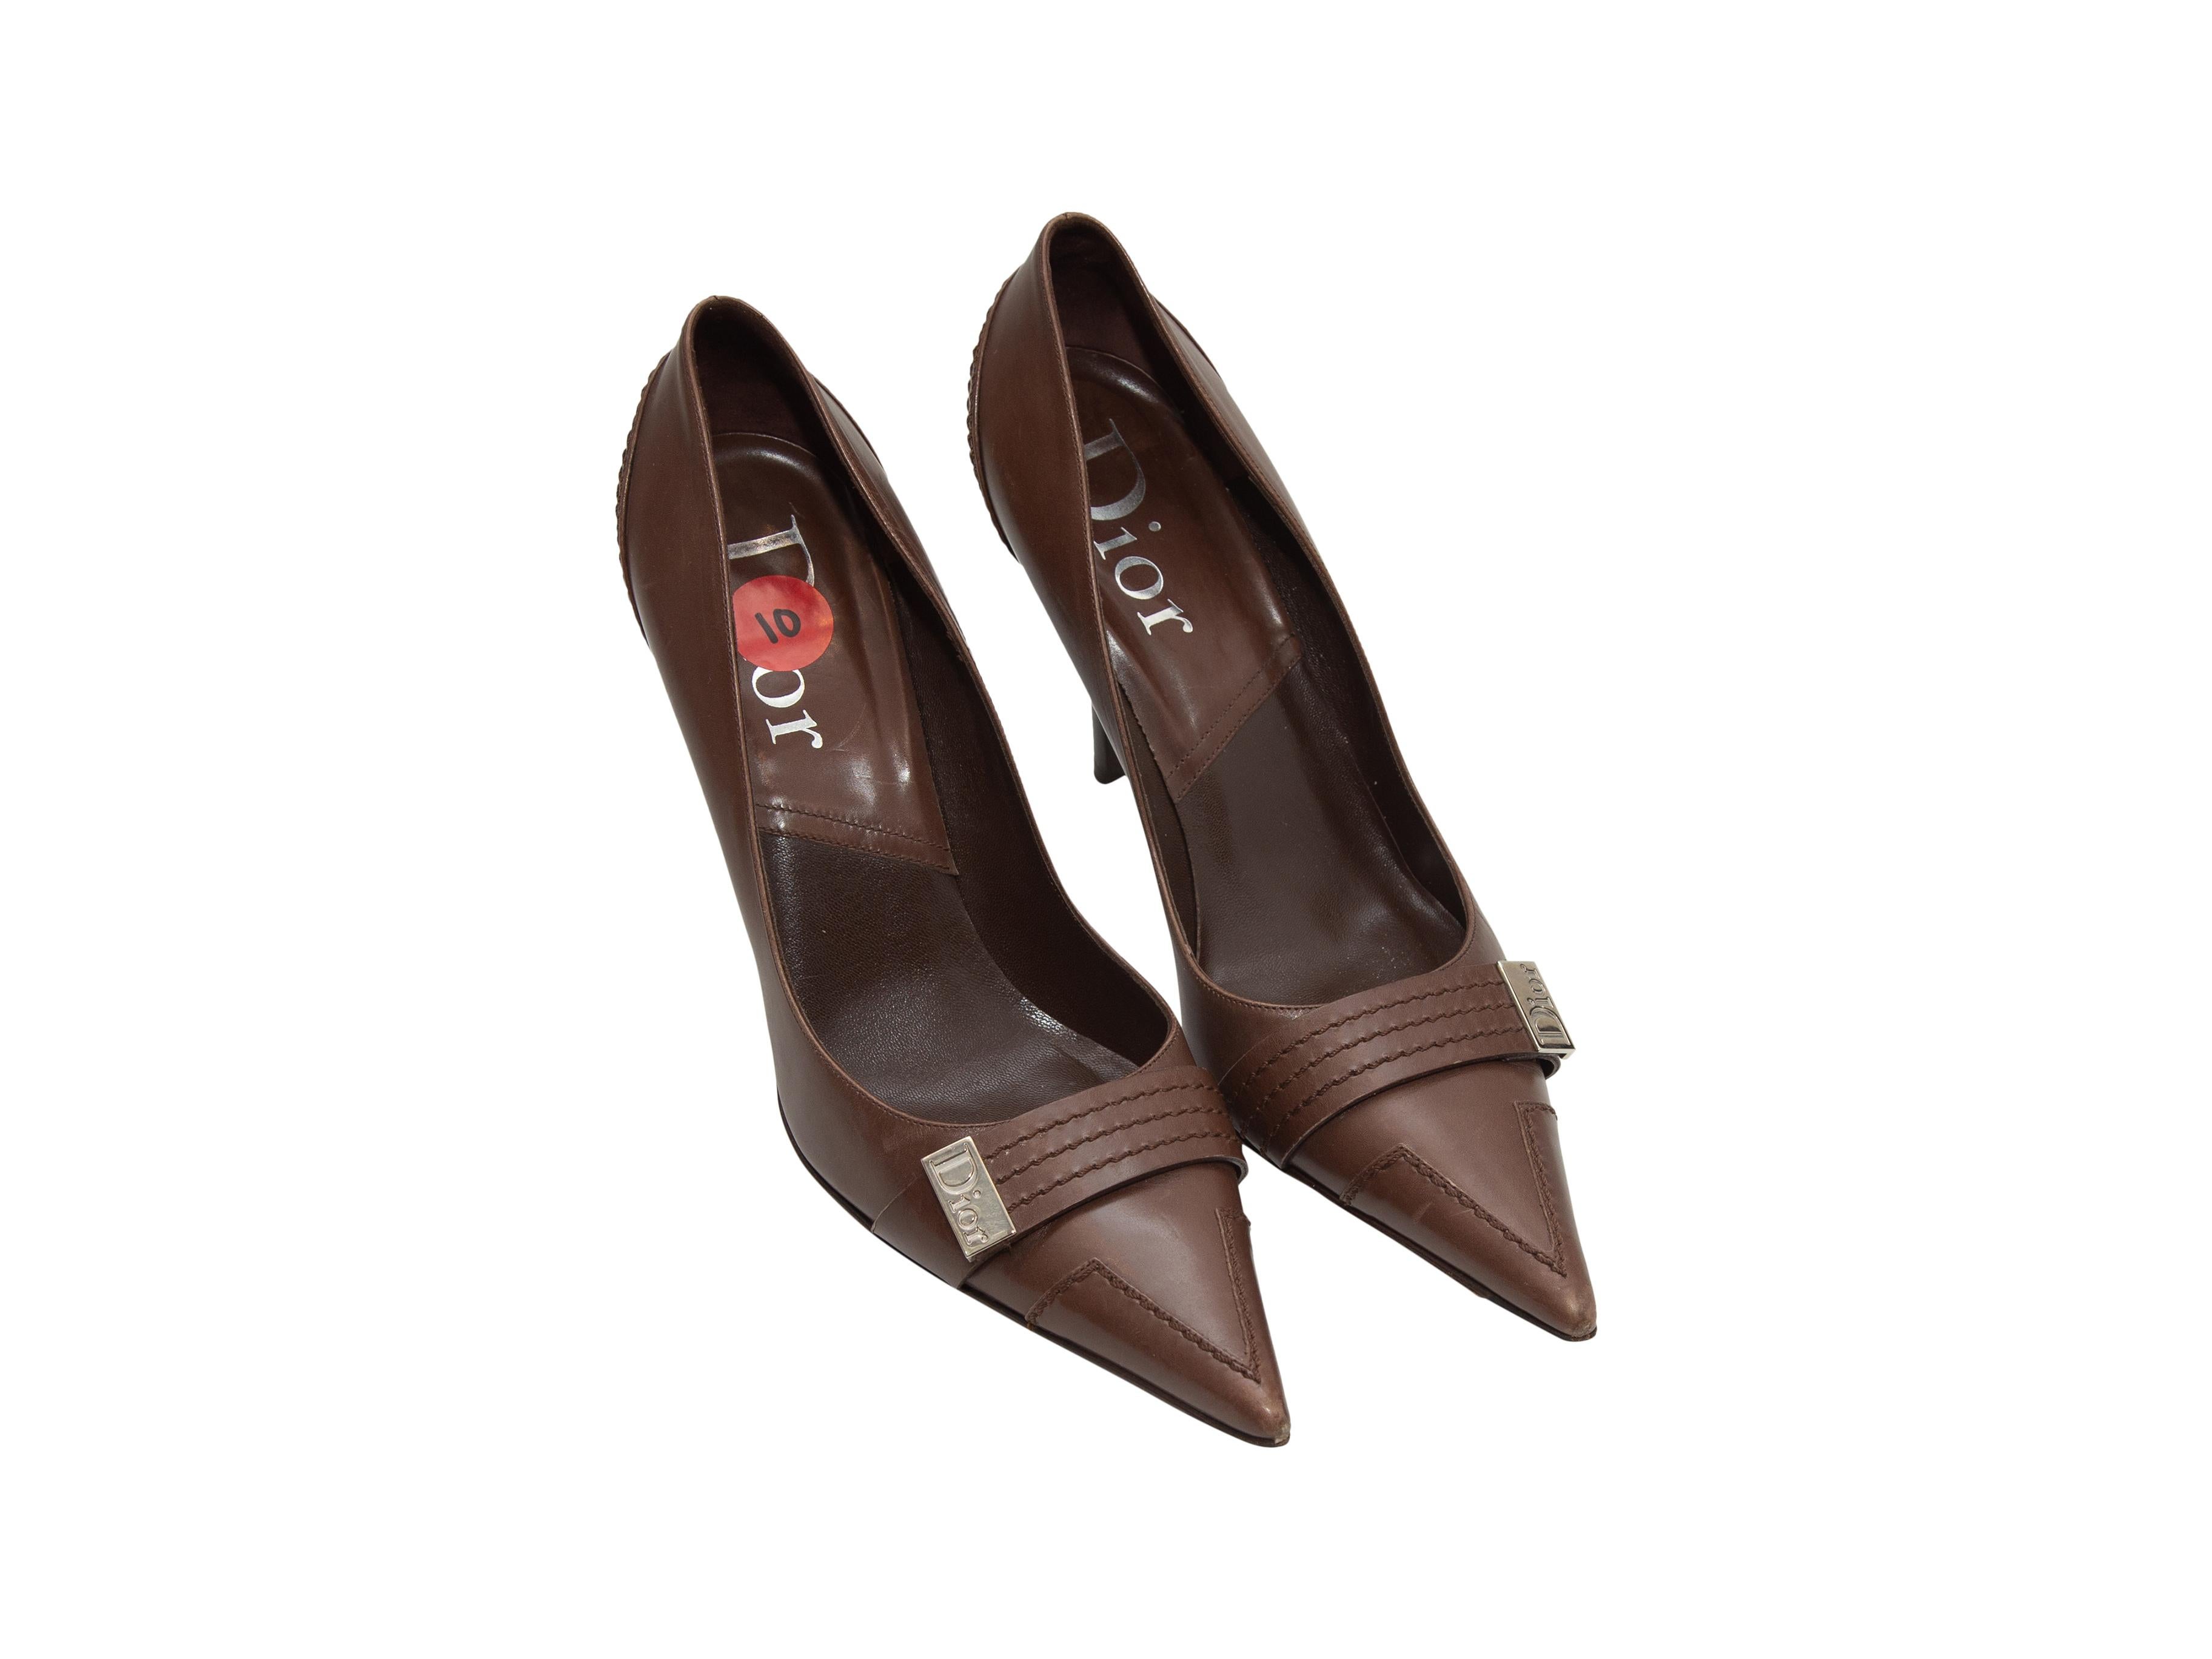 Product details: Brown leather pointed-toe pumps by Christian Dior. Silver-tone buckle accents at toes. Designer size 40. 4